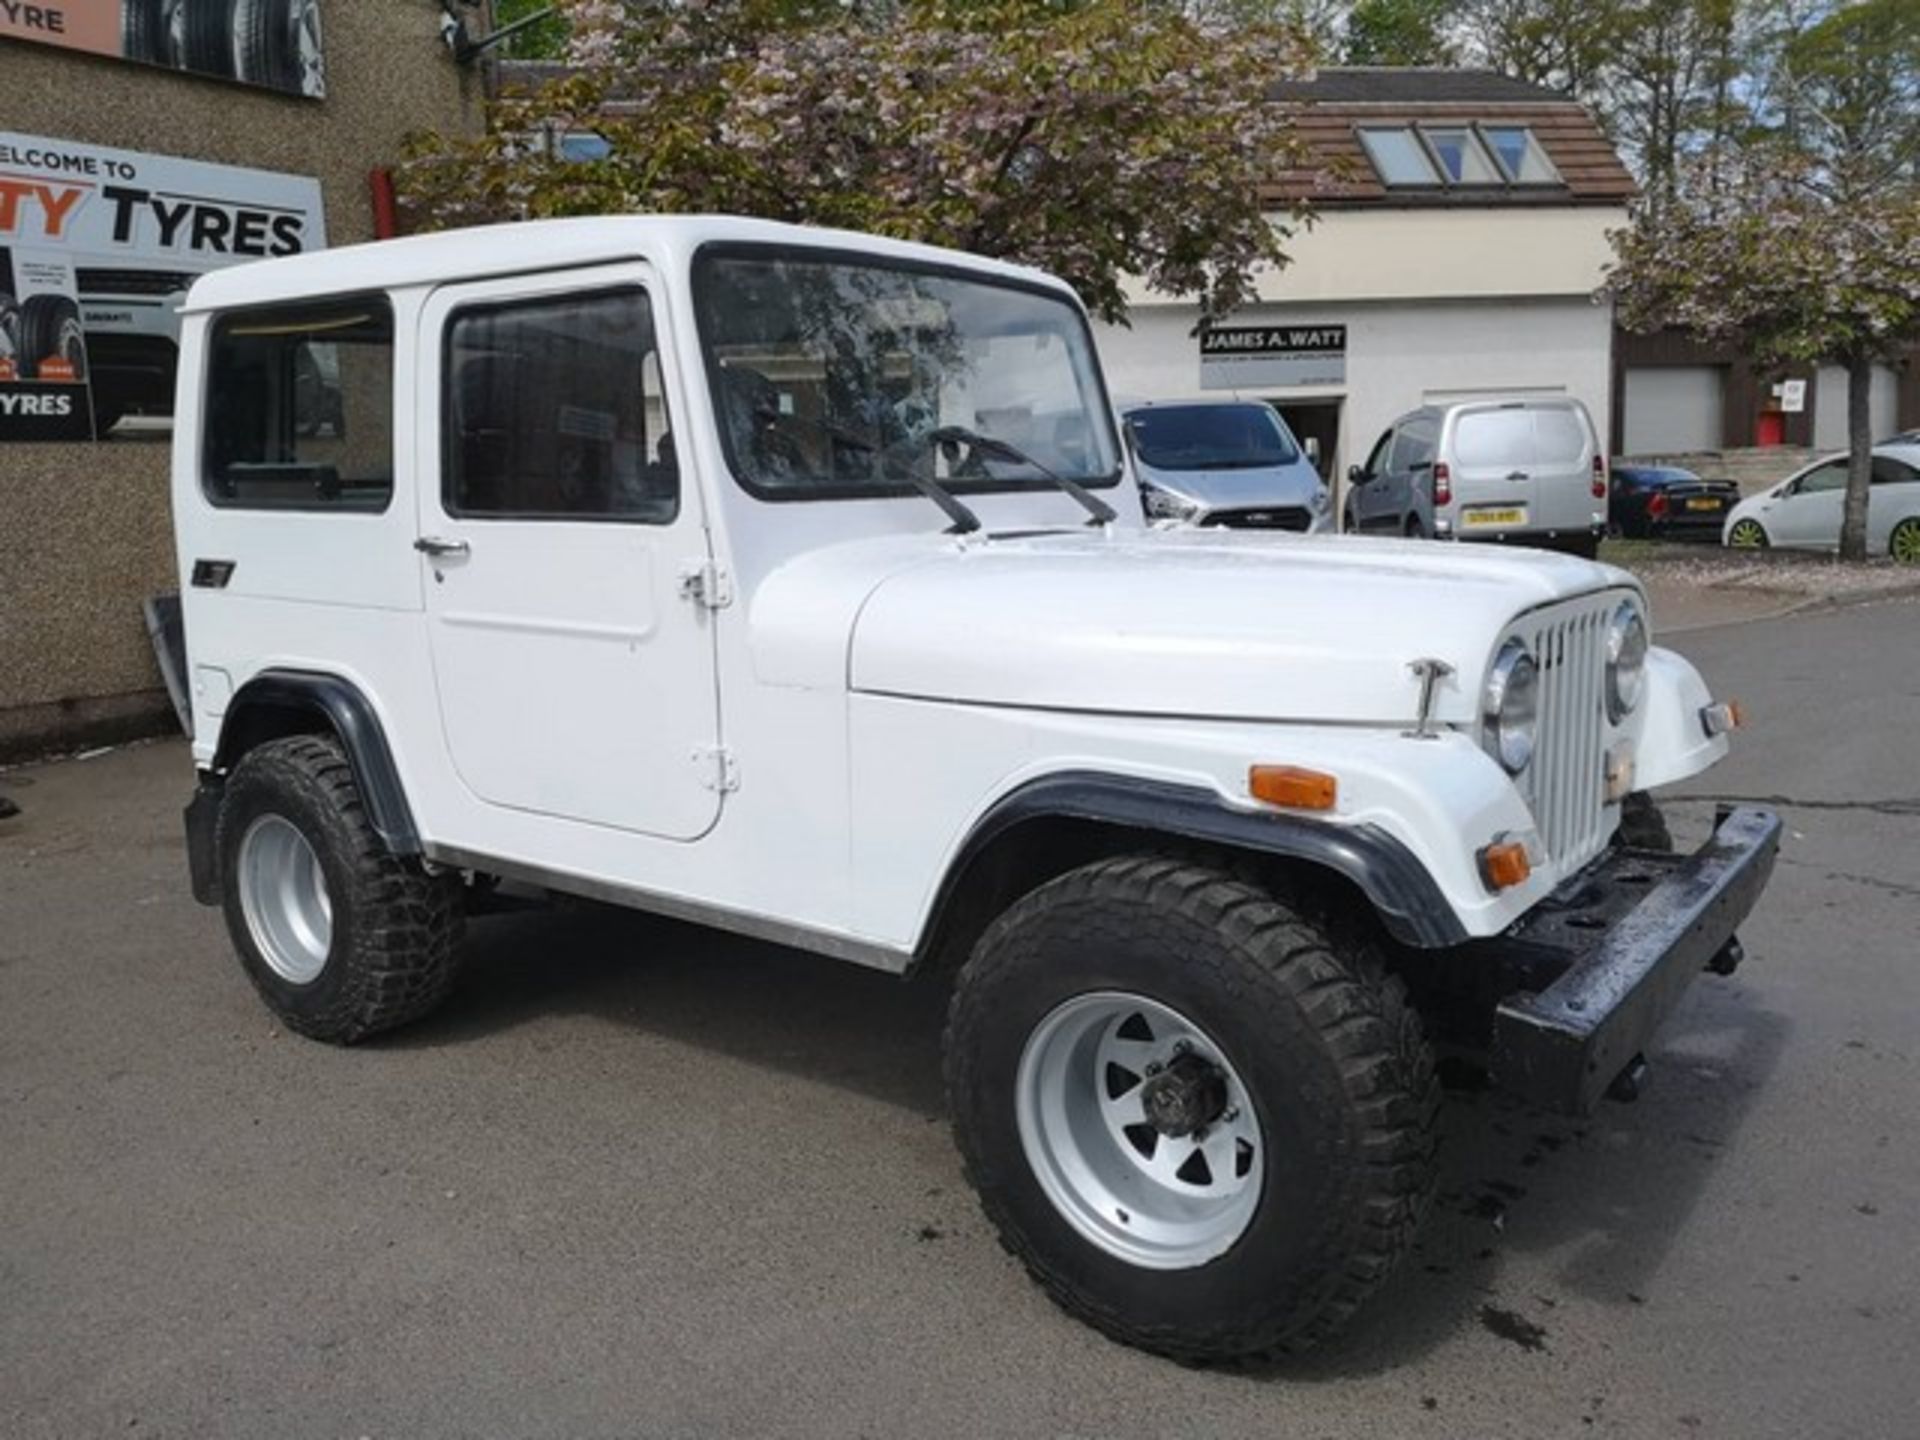 SSANG YONG KORANDO CJ-7 - Norweigan Import declared manufactured 1988 to be fully UK registered prio - Image 6 of 7